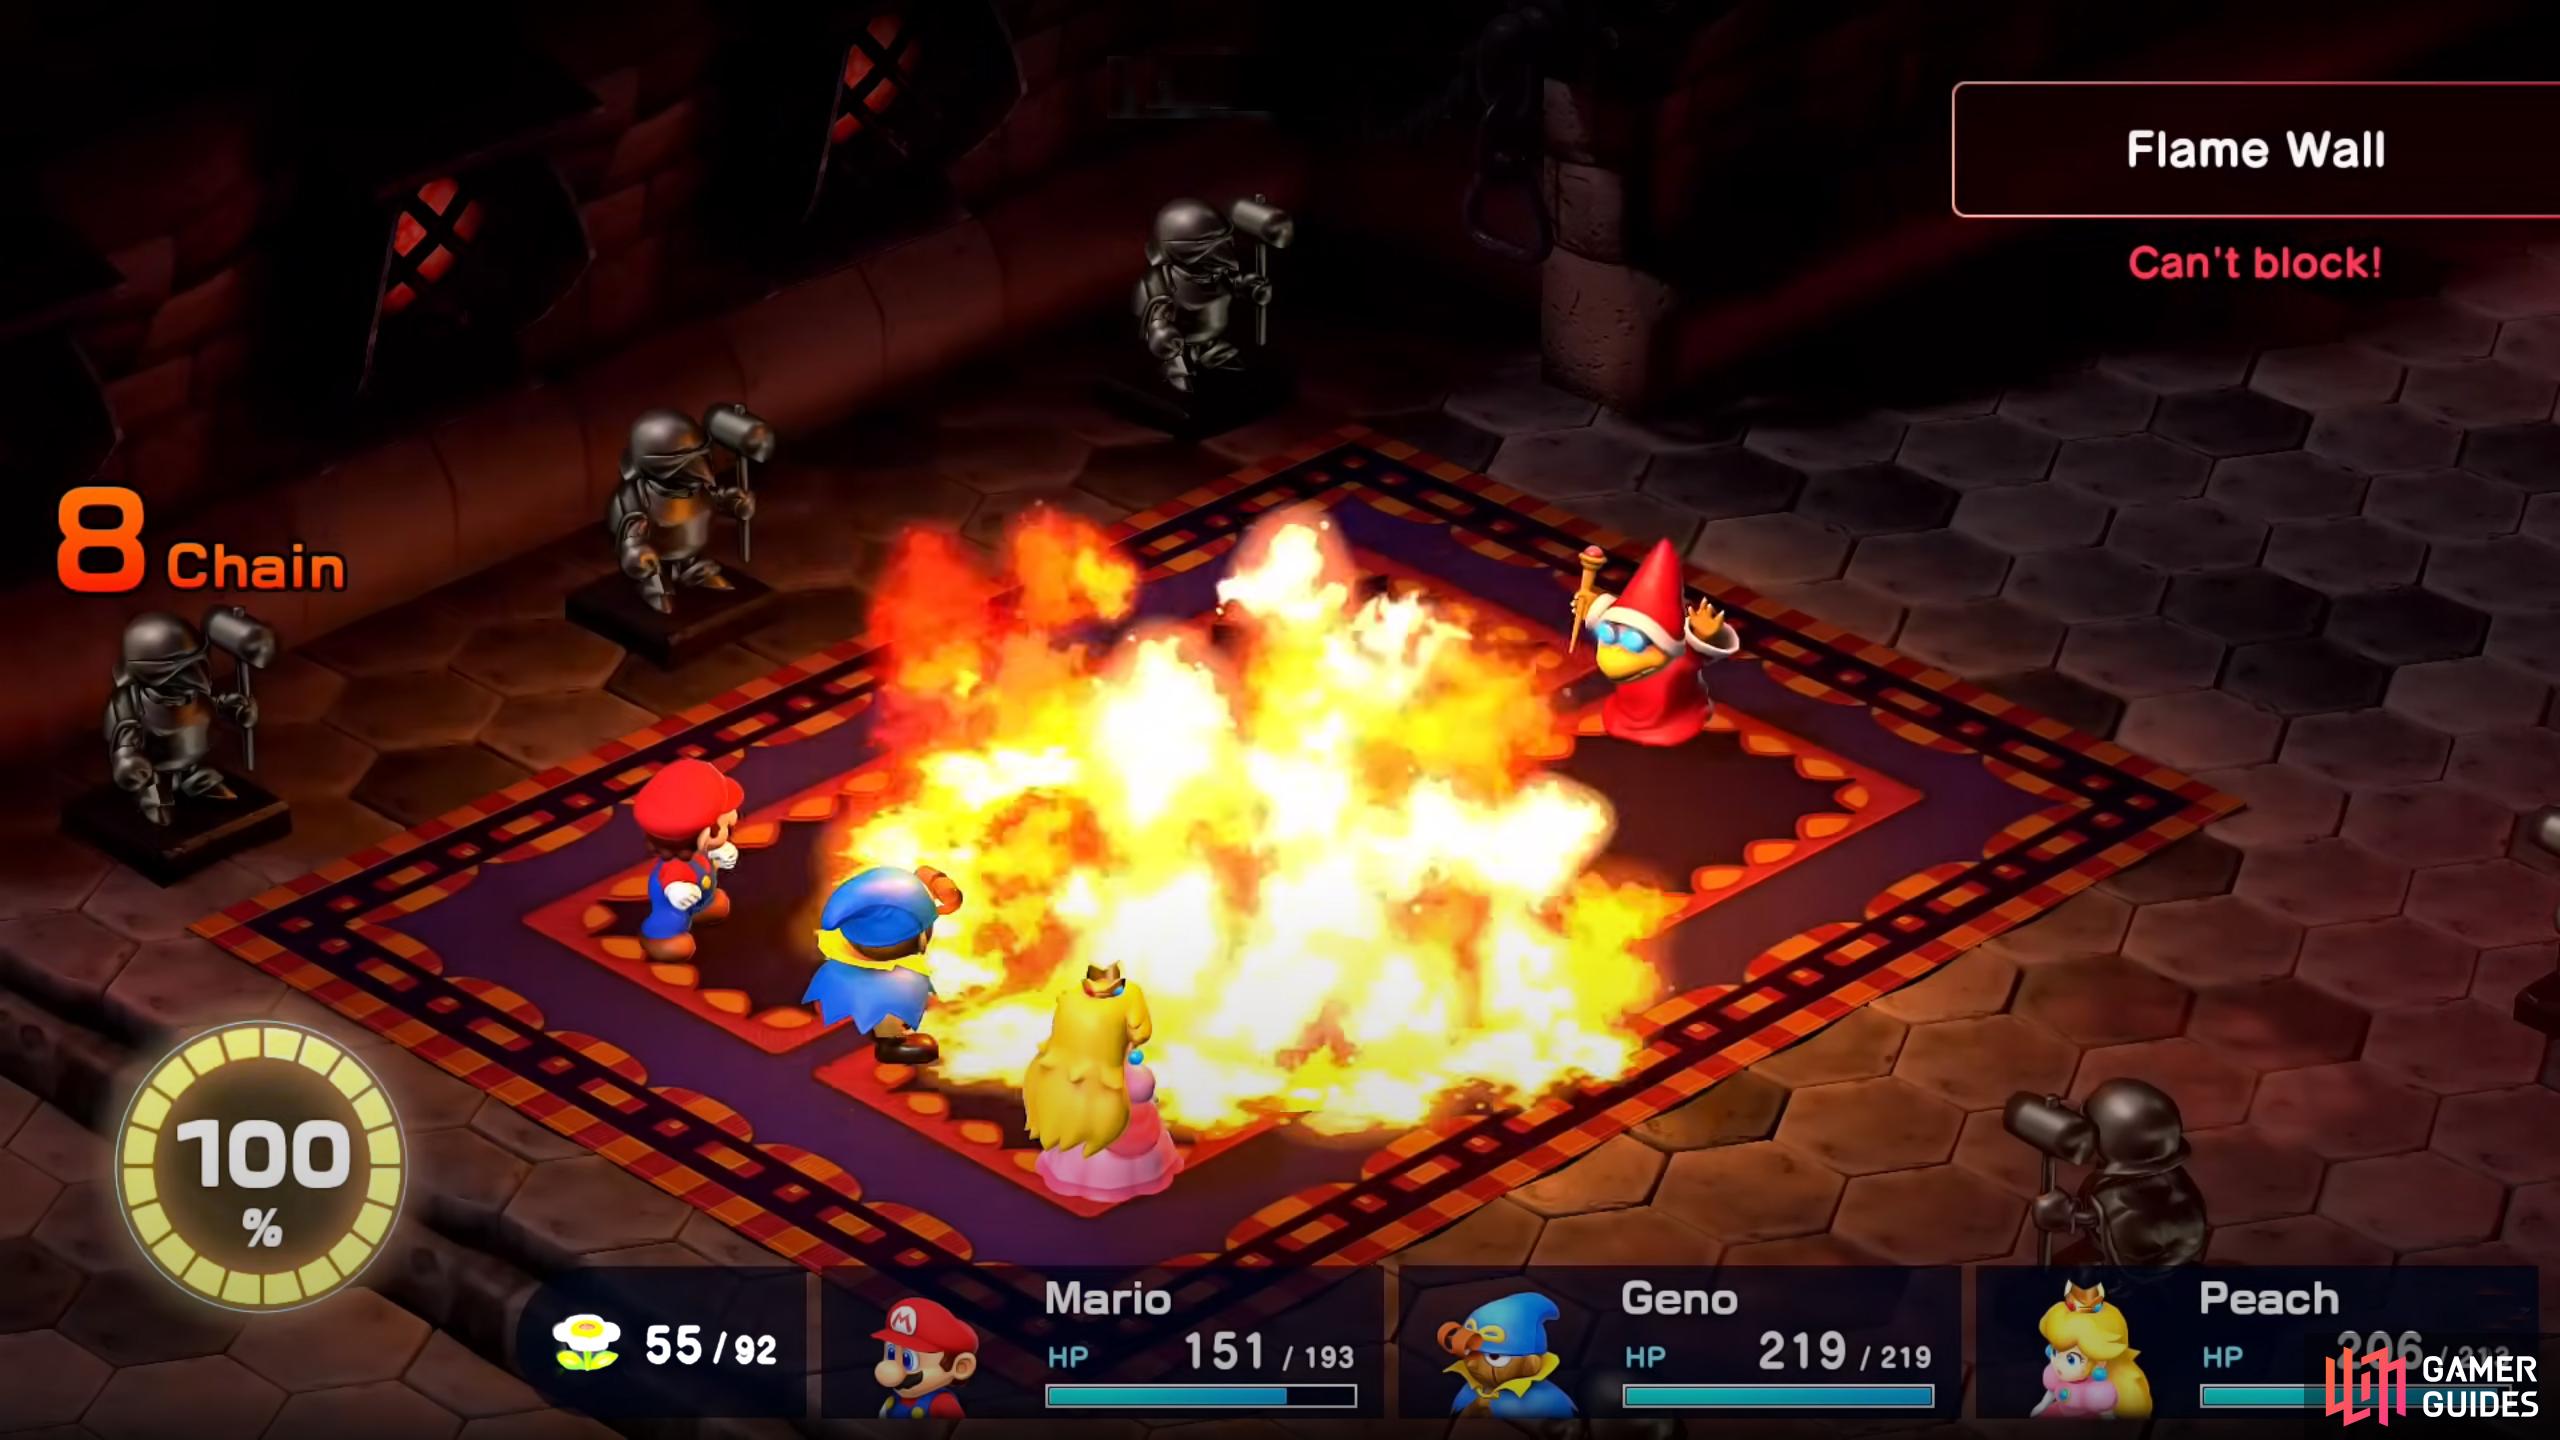 Flame Wall is an attack that hits all party members. 